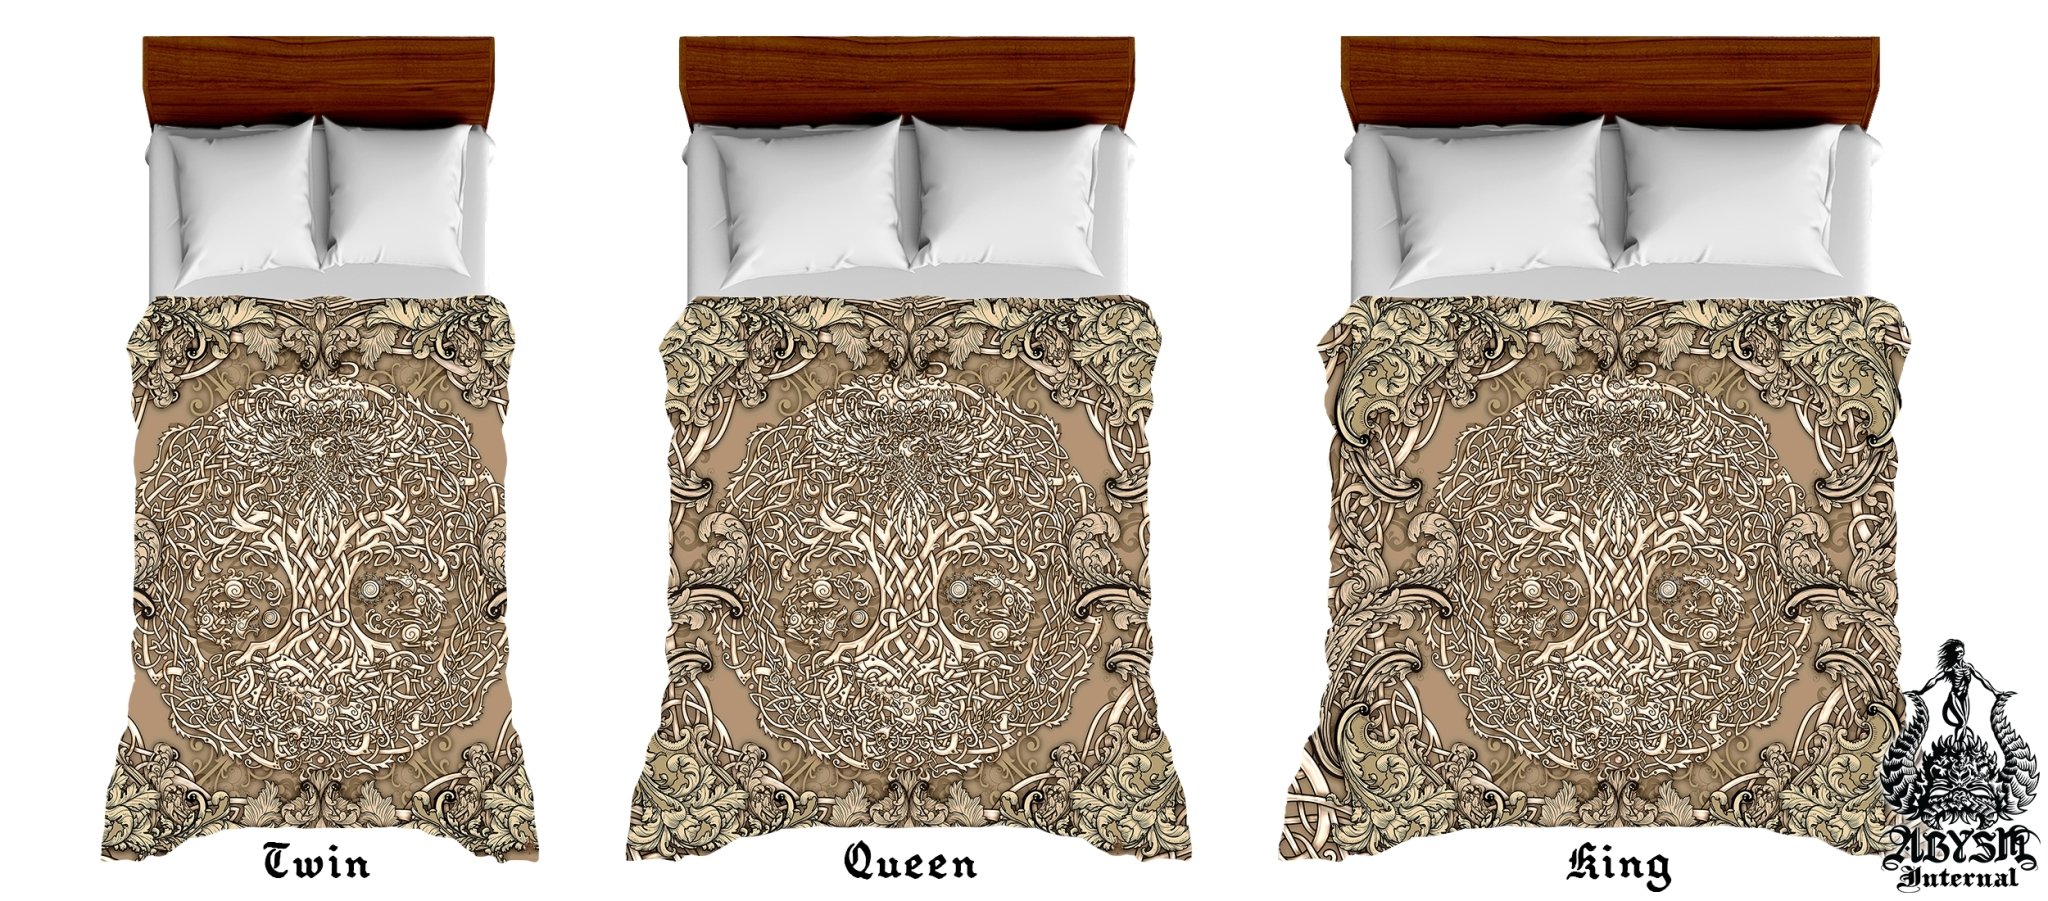 Yggdrasil Bedding Set, Comforter and Duvet, Viking Tree of Life, Norse Bed Cover and Bedroom Decor, King, Queen and Twin Size - Cream - Abysm Internal